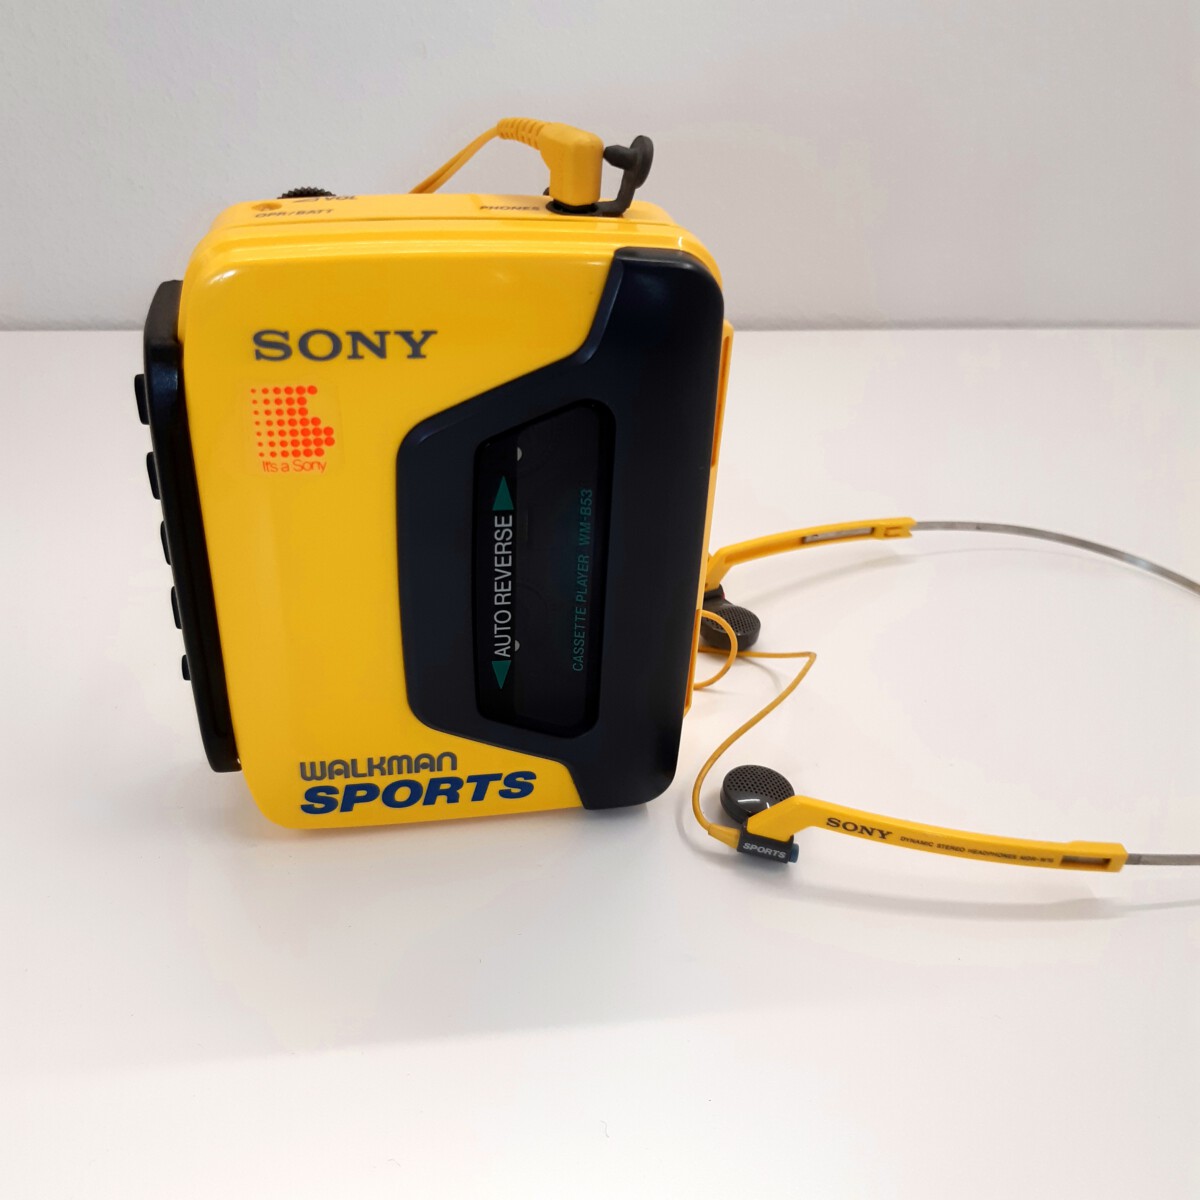 Sports Walkman WM-B53 by Sony. Comes With the Original Mdr-w15 Headphones.  Great Working Condition 